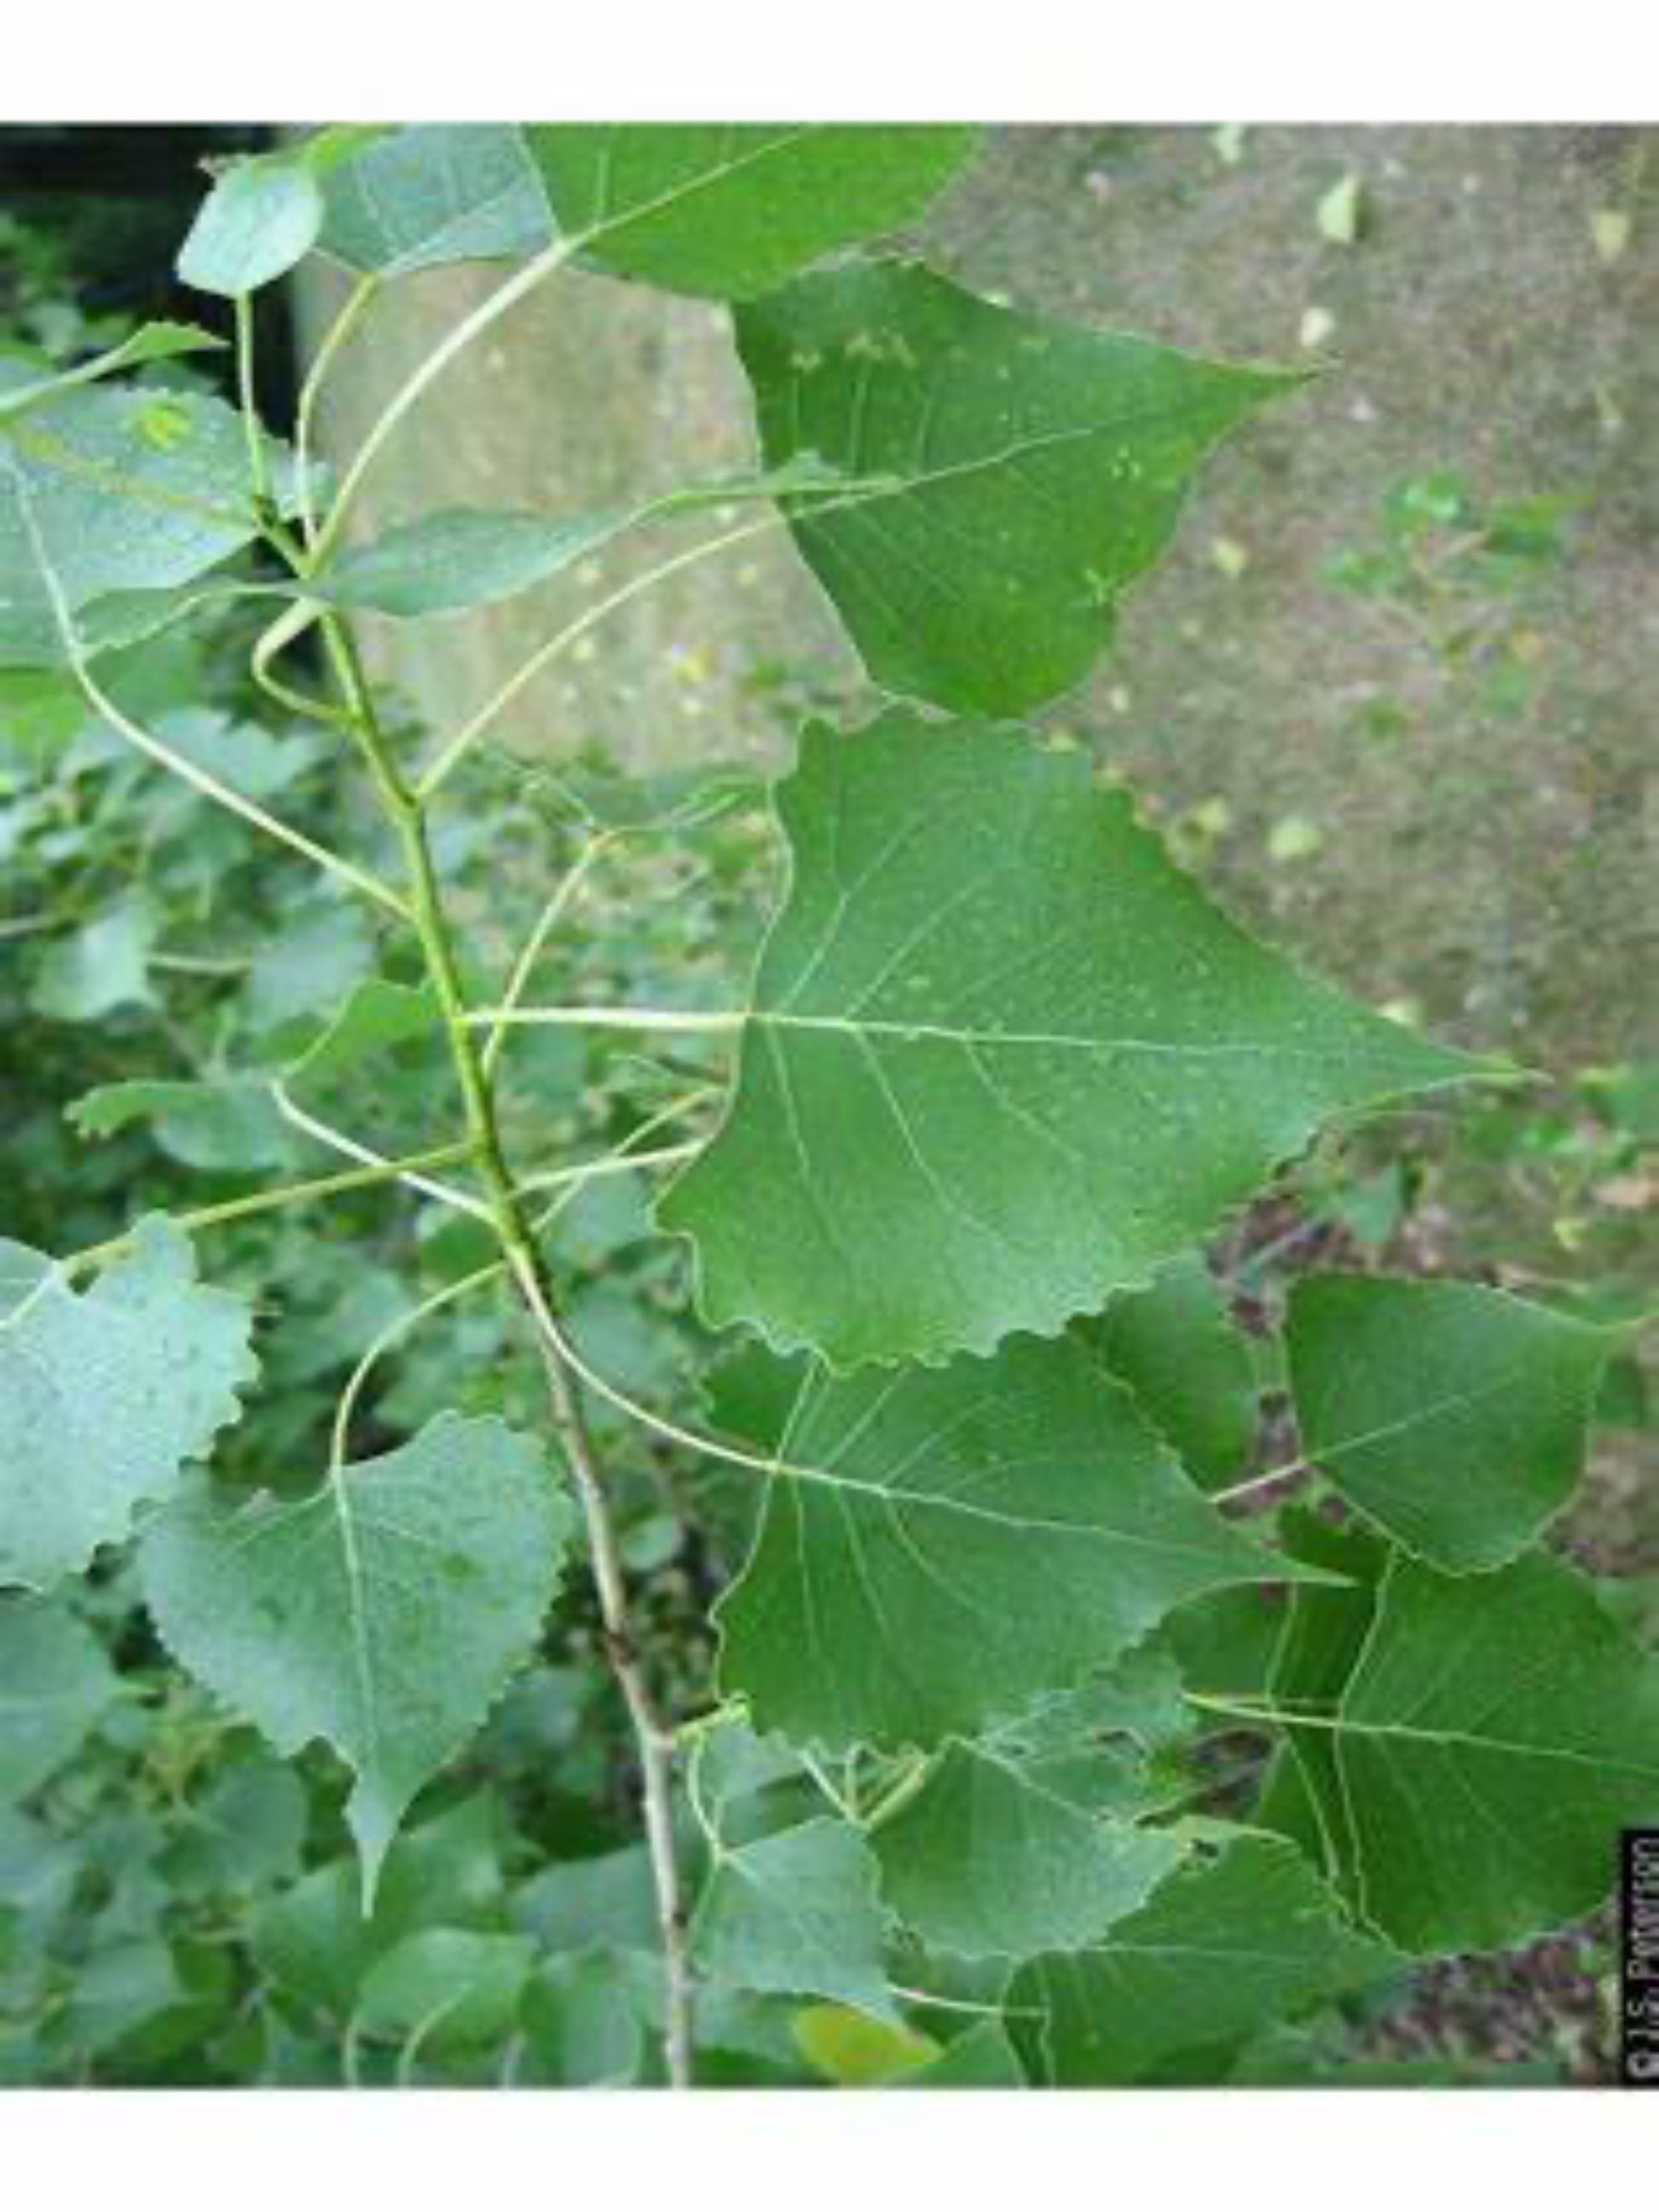 populus deltoides leaf is the host plant for red spotted purple butterfly